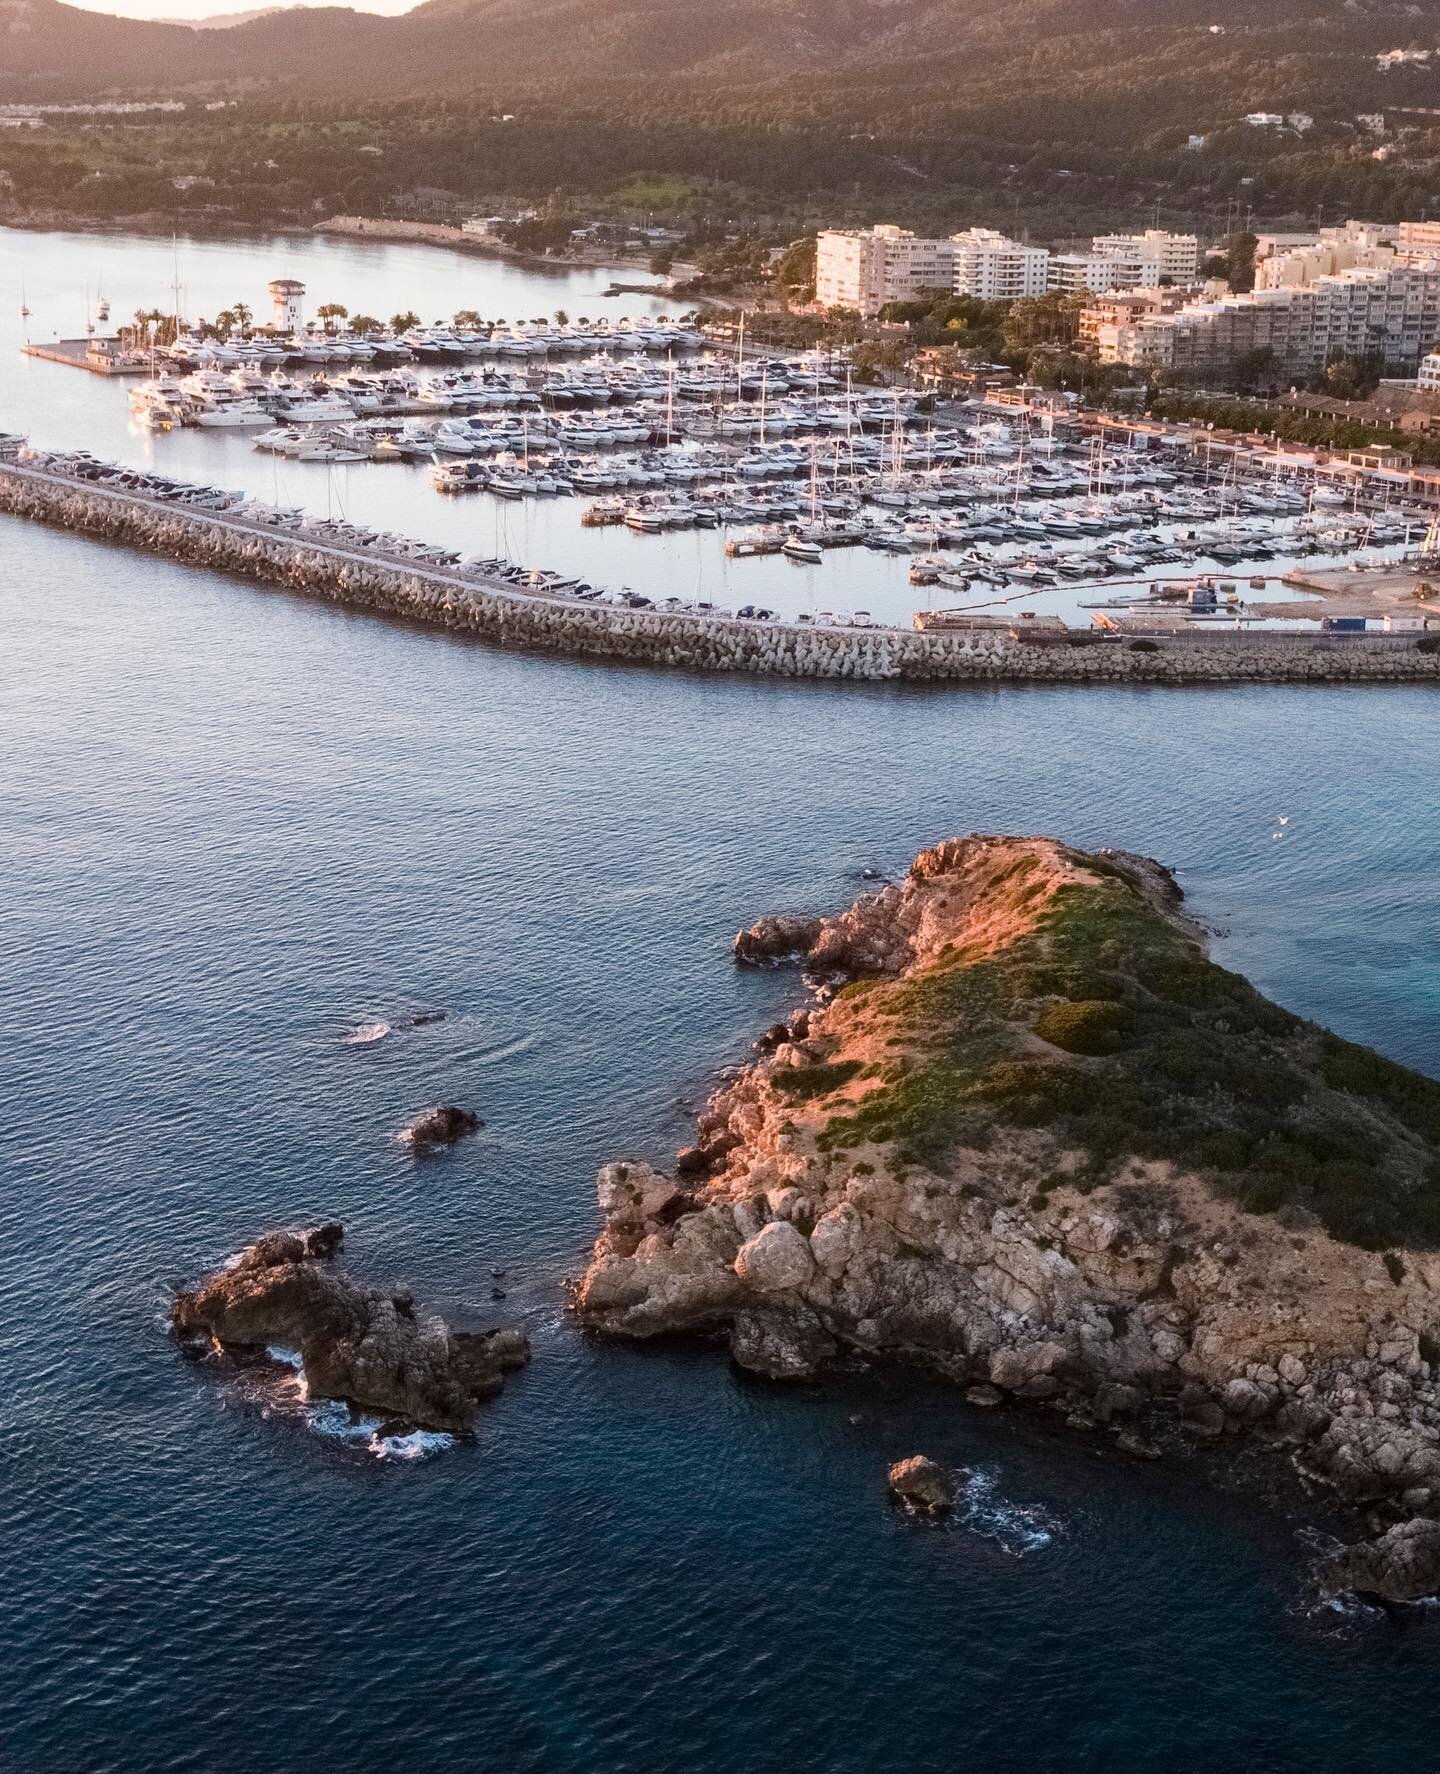 We&acute;re located in one of the most beautiful and luxurious ports of Mallorca; Puerto Portals 😍⁠
⁠
Make sure to visit us when visiting the port! ⁠
⁠
⁠
⁠
⁠
#spain #palmademallorca #majorca #palma #islasbaleares #mallorcaisland #mallorcagram #visit